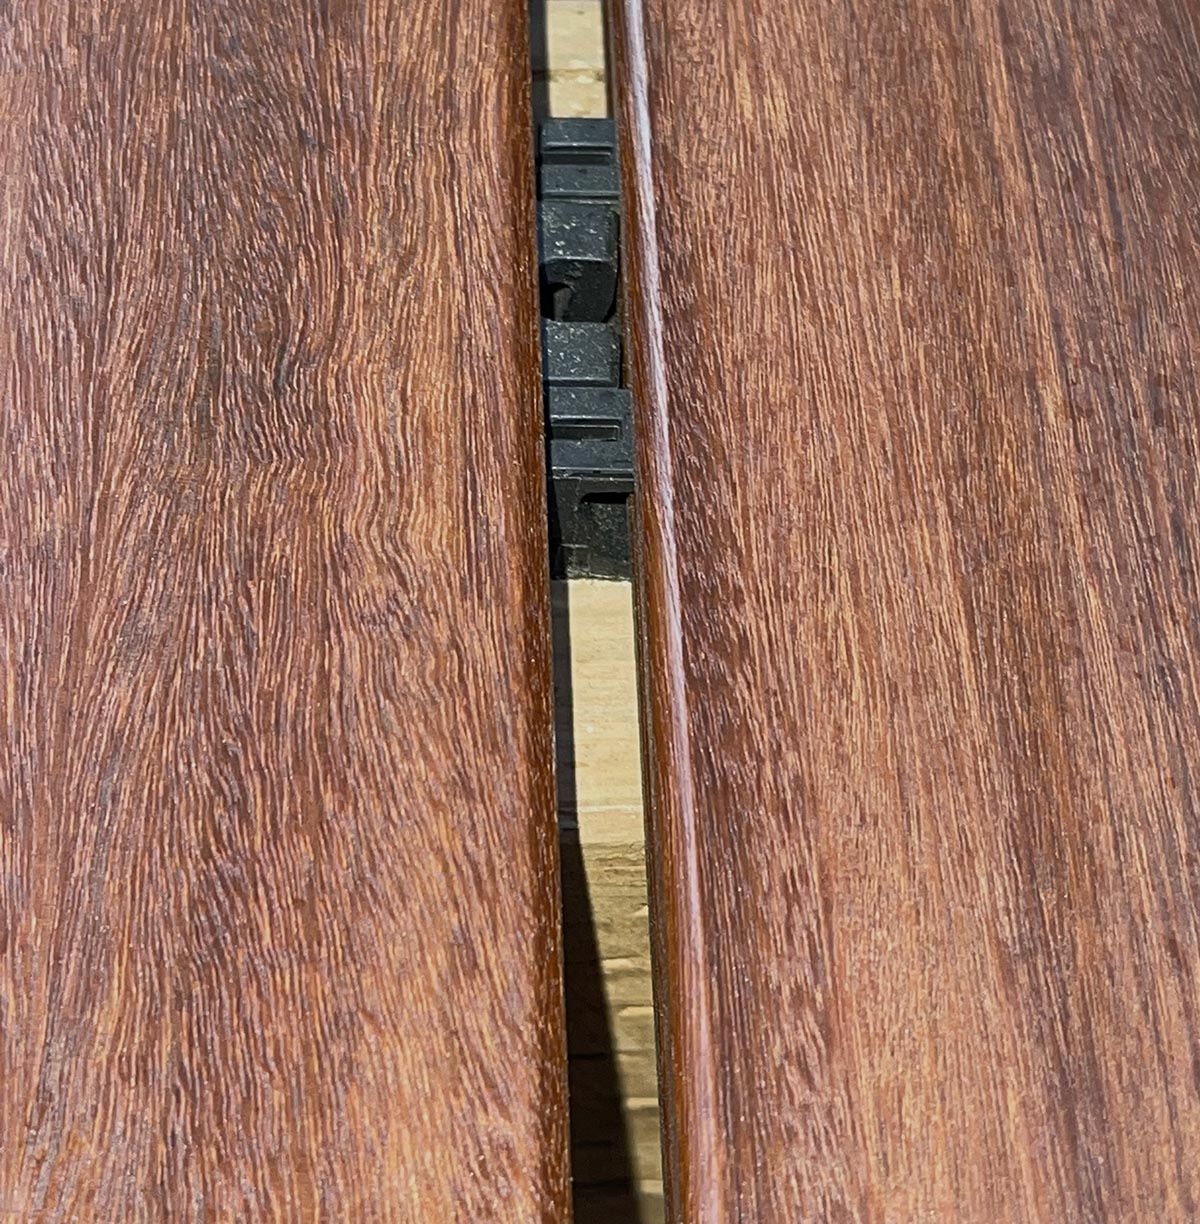 ExoDek QuickClip close up of installed clip in 5/4x4 Ipe grooved decking on 4x6 joists, 24 inches above ground.